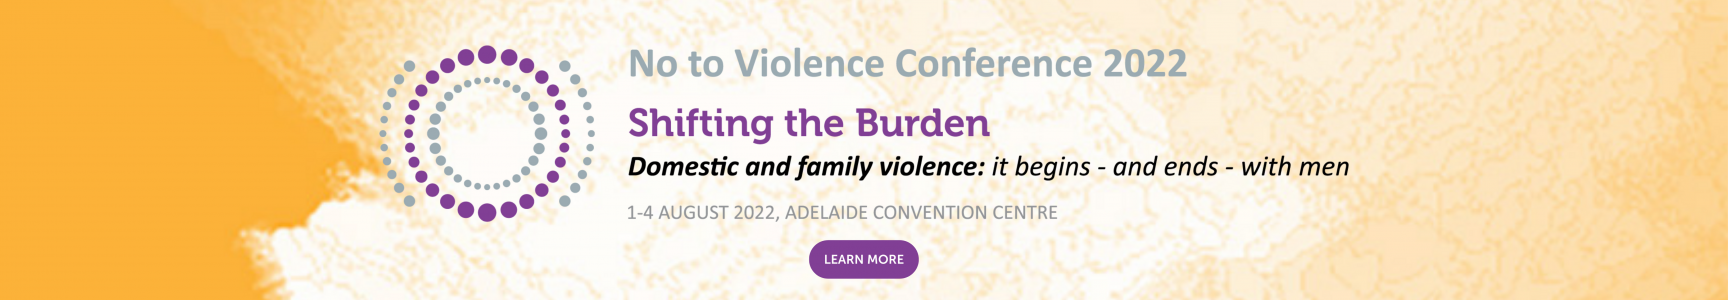 NTV Conference 2022 Shifting the burden